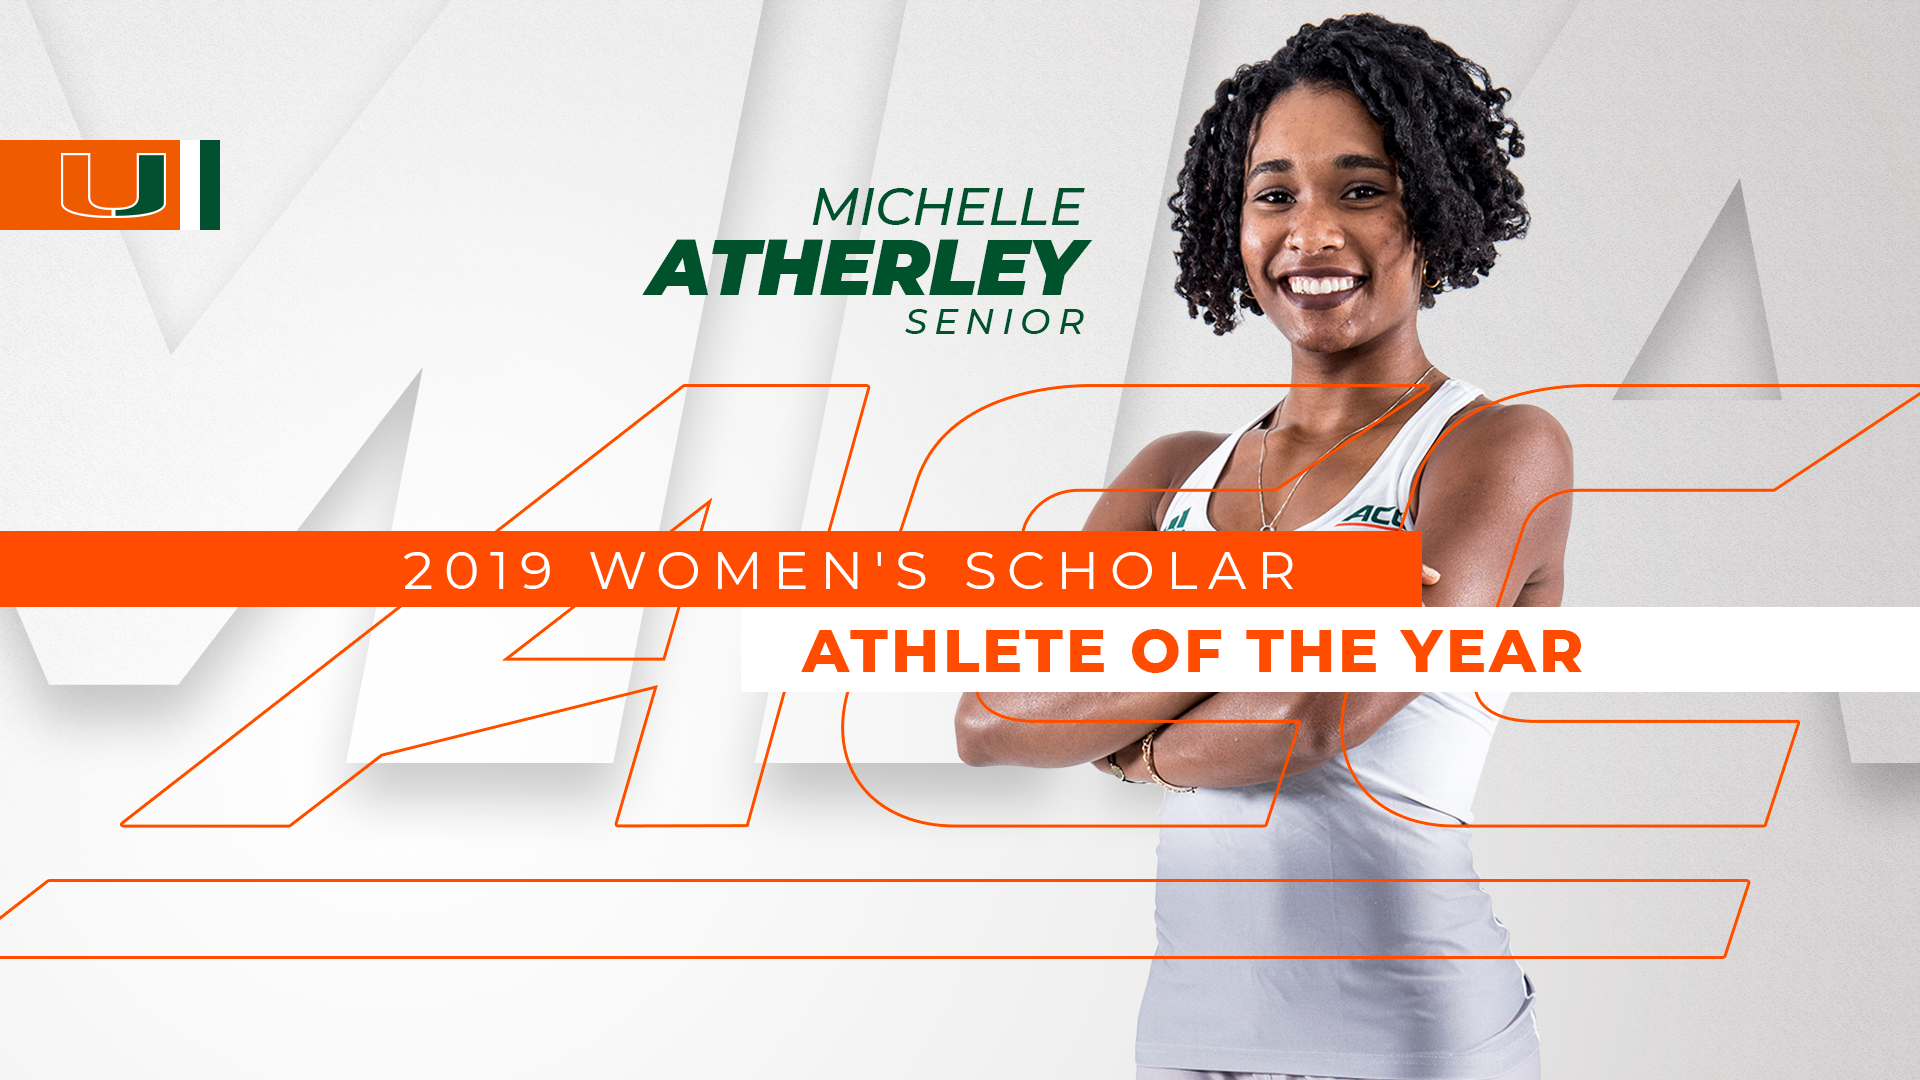 Atherley Named Track & Field Scholar-Athlete of the Year